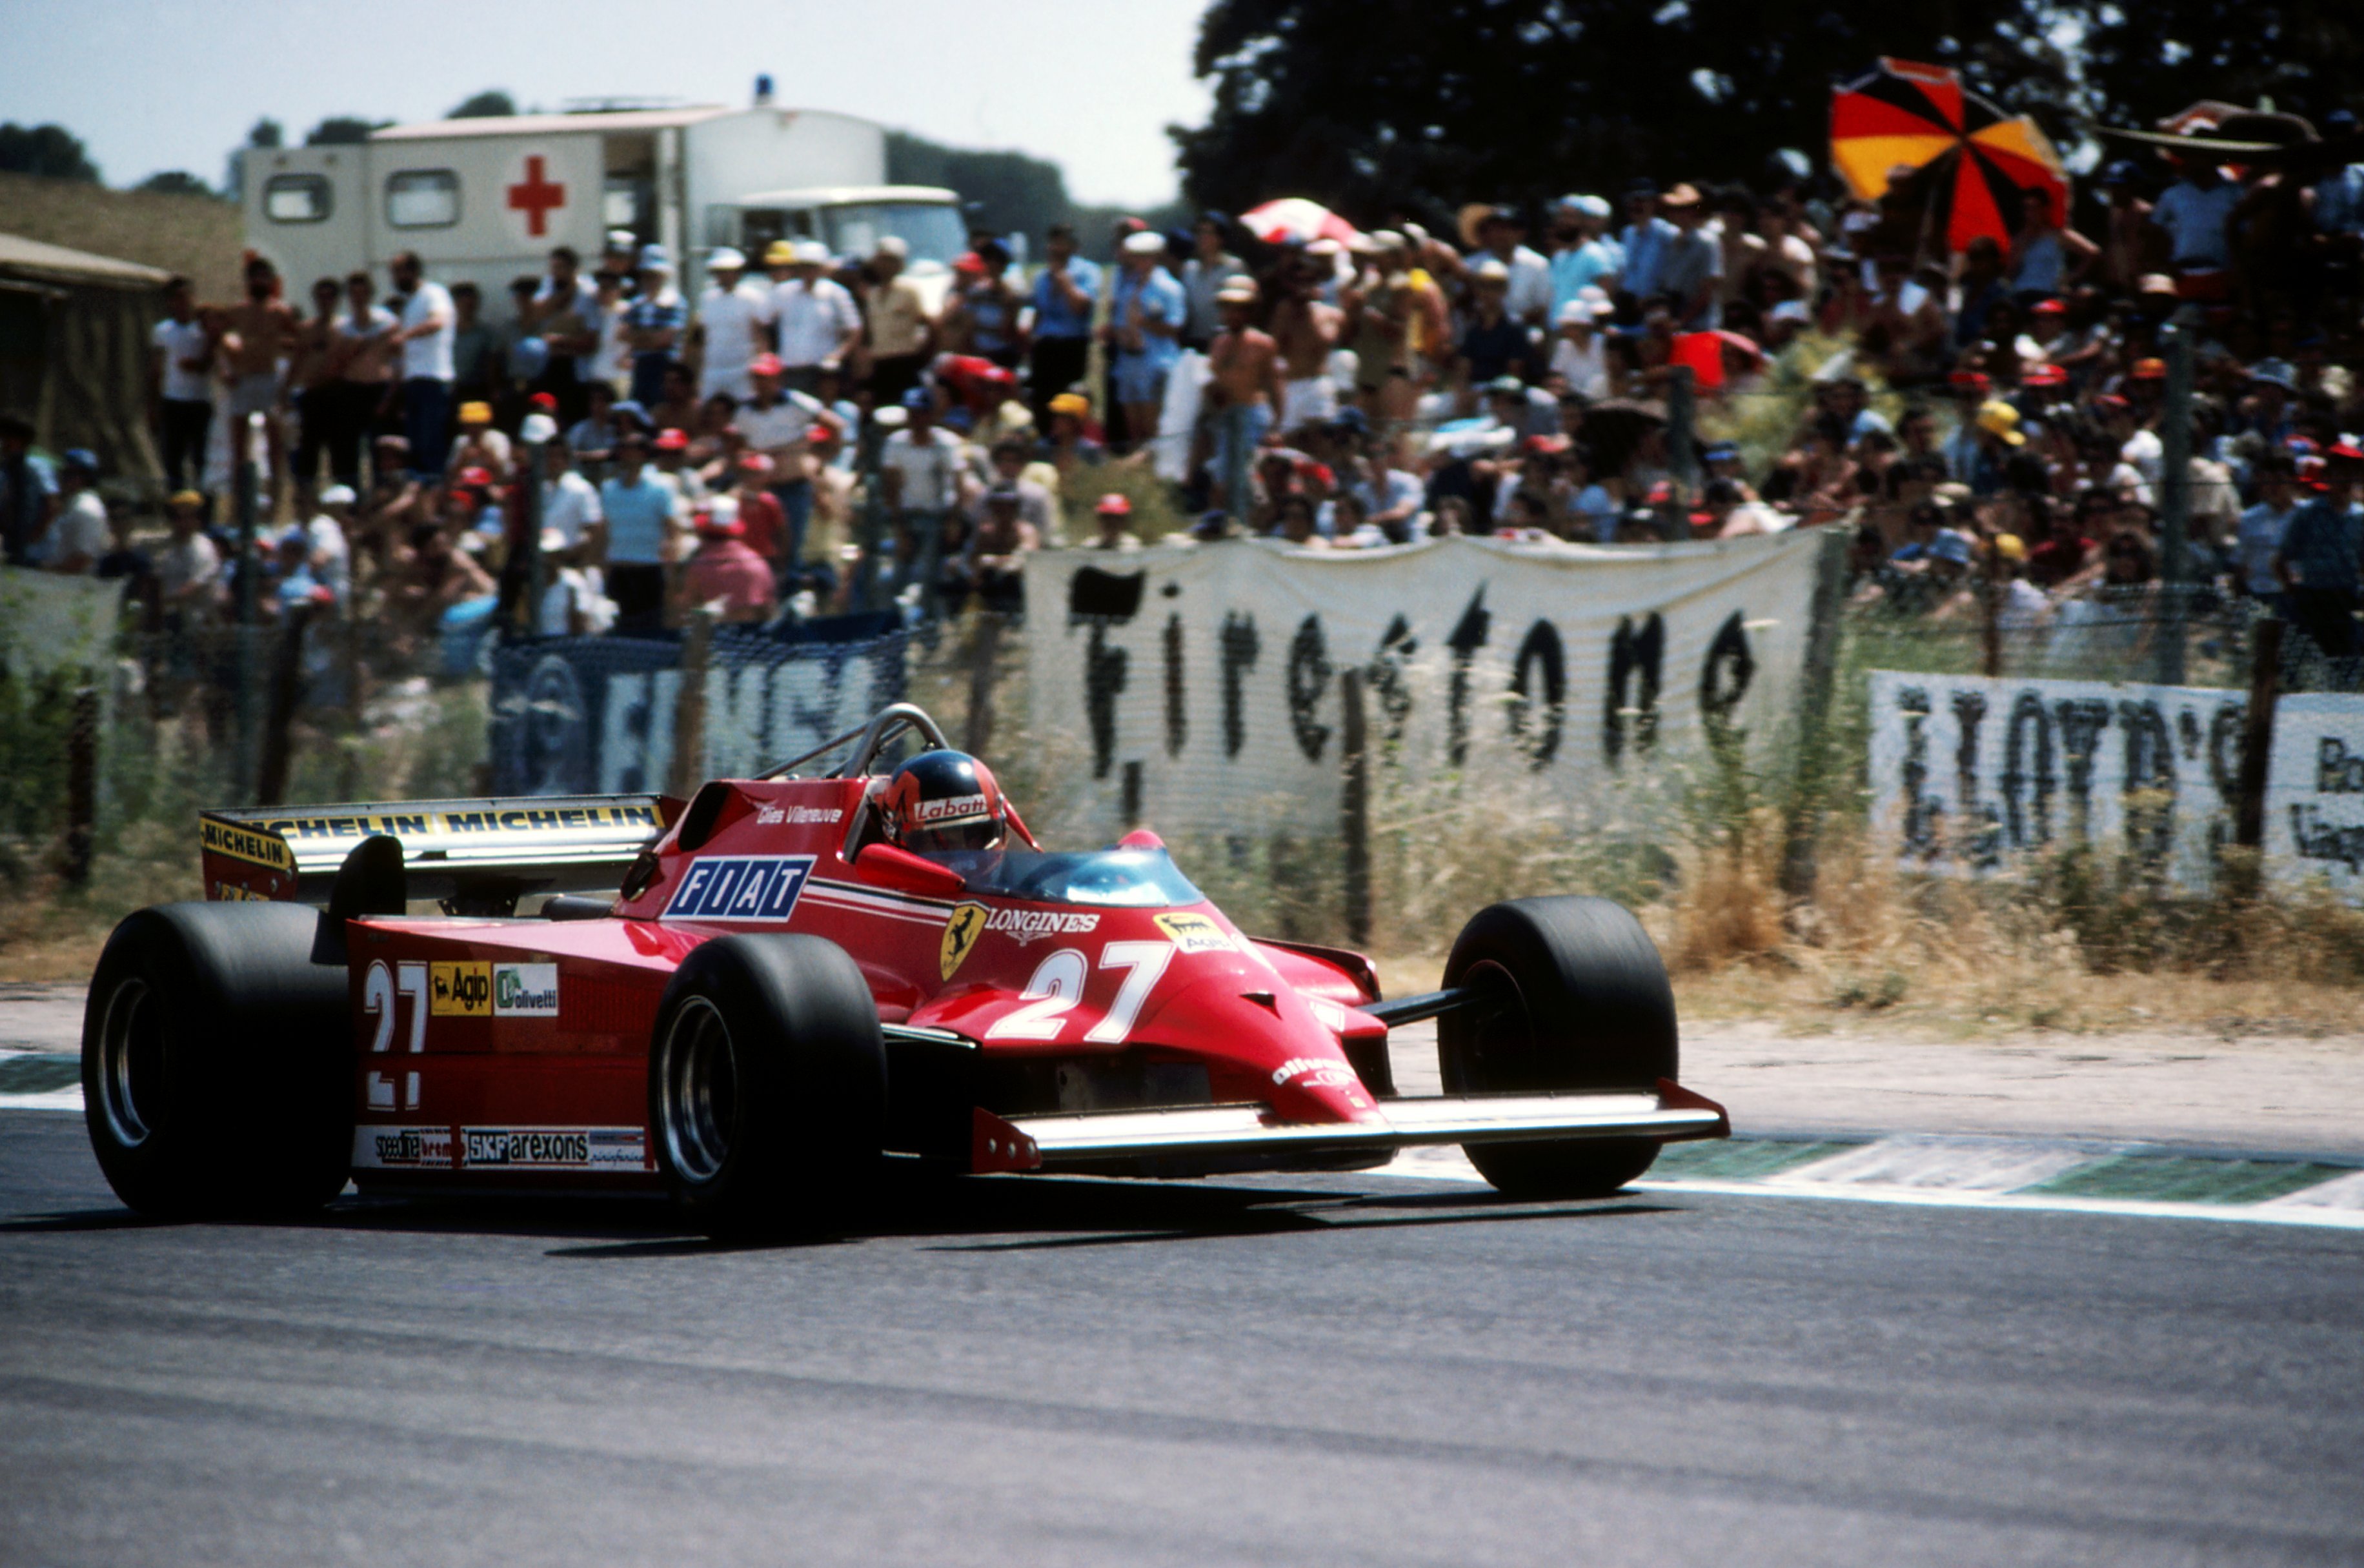 Some classic Gilles